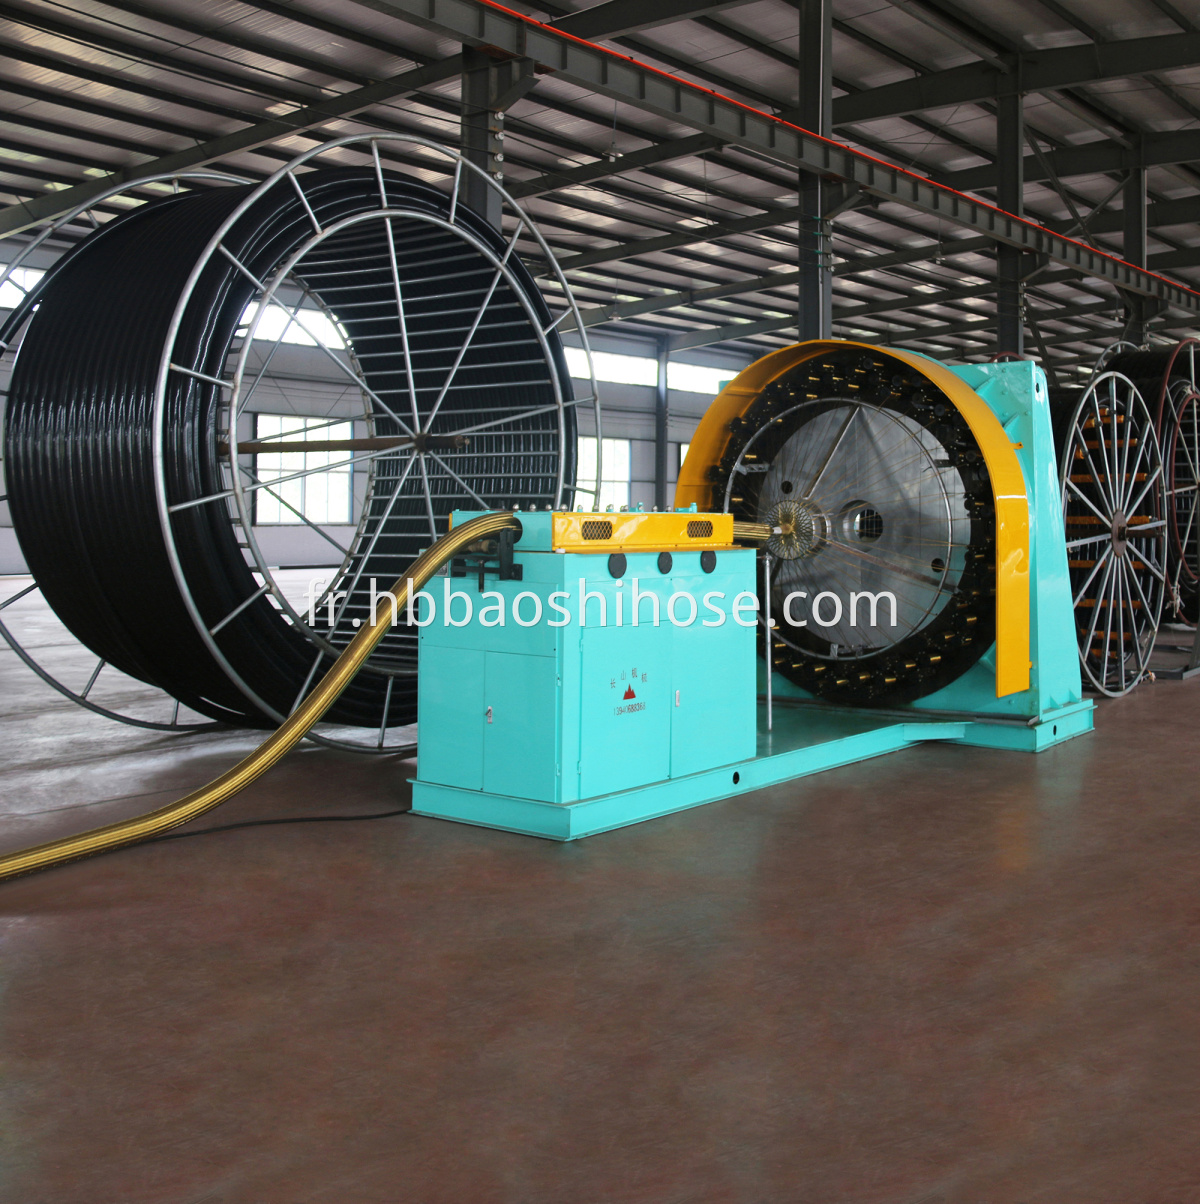 Steel-Braided Composite Pipe